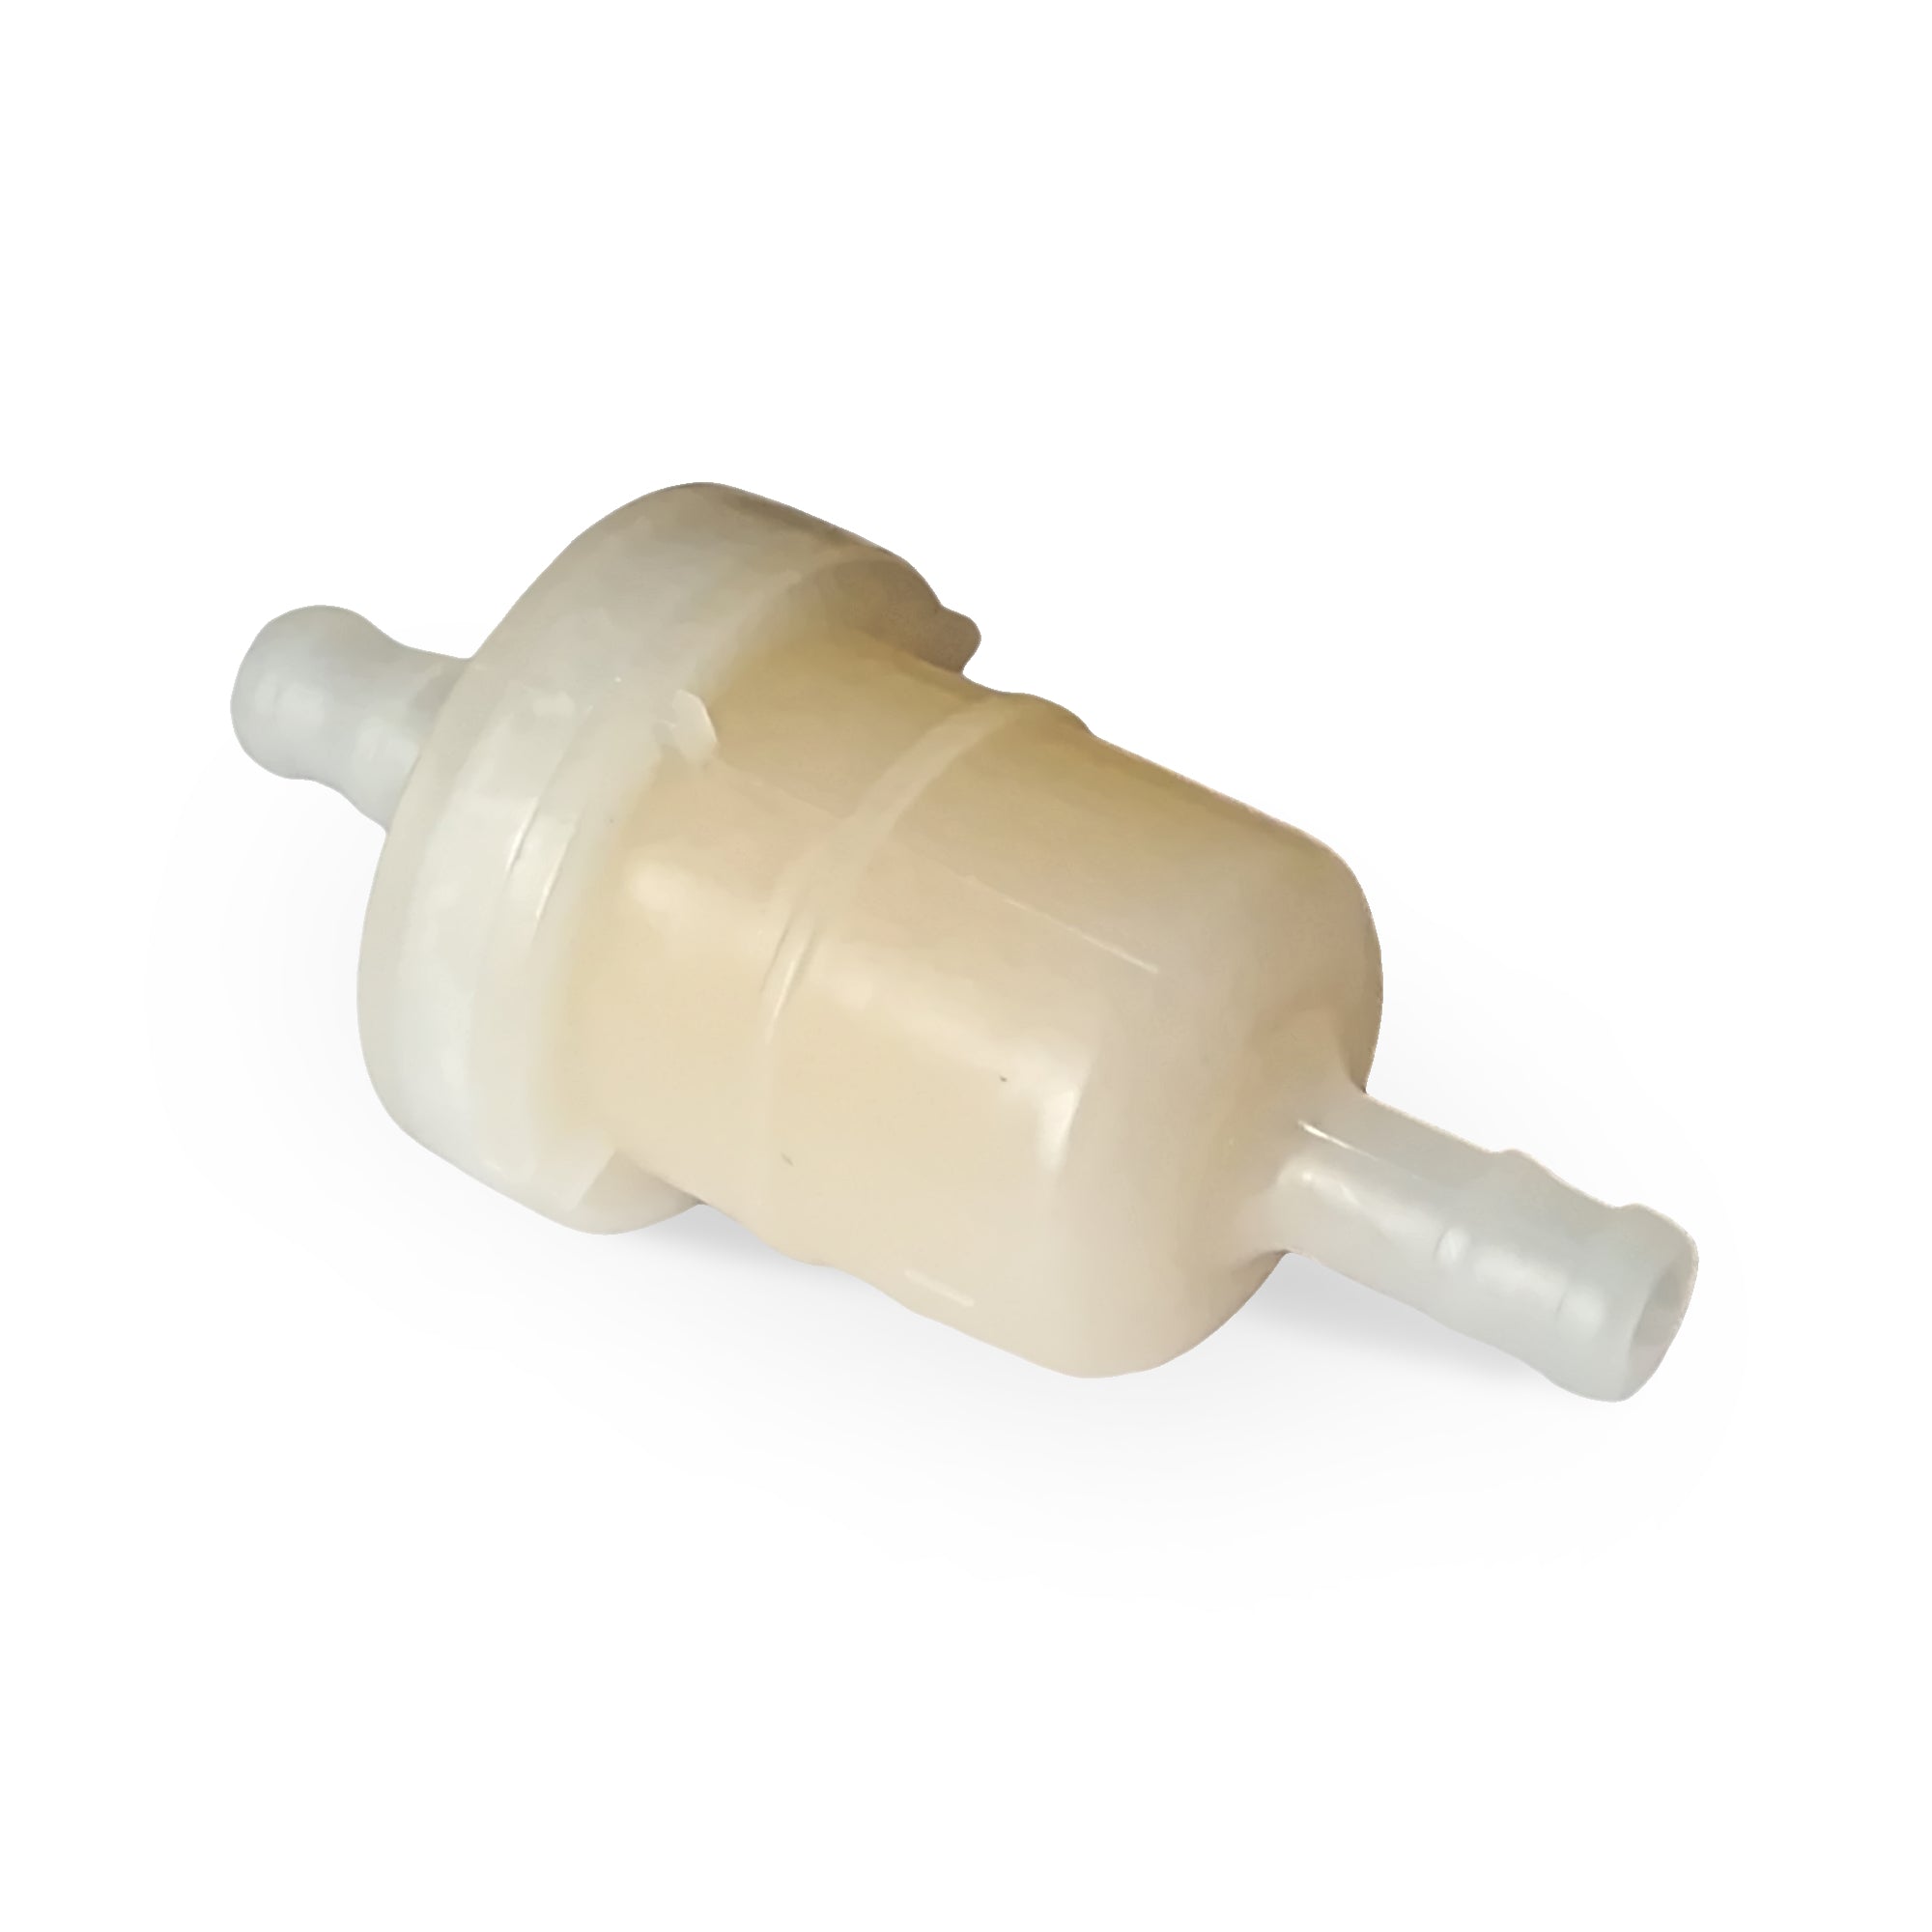 Yamaha In-Line Fuel Filter - 6EE-F4251-00